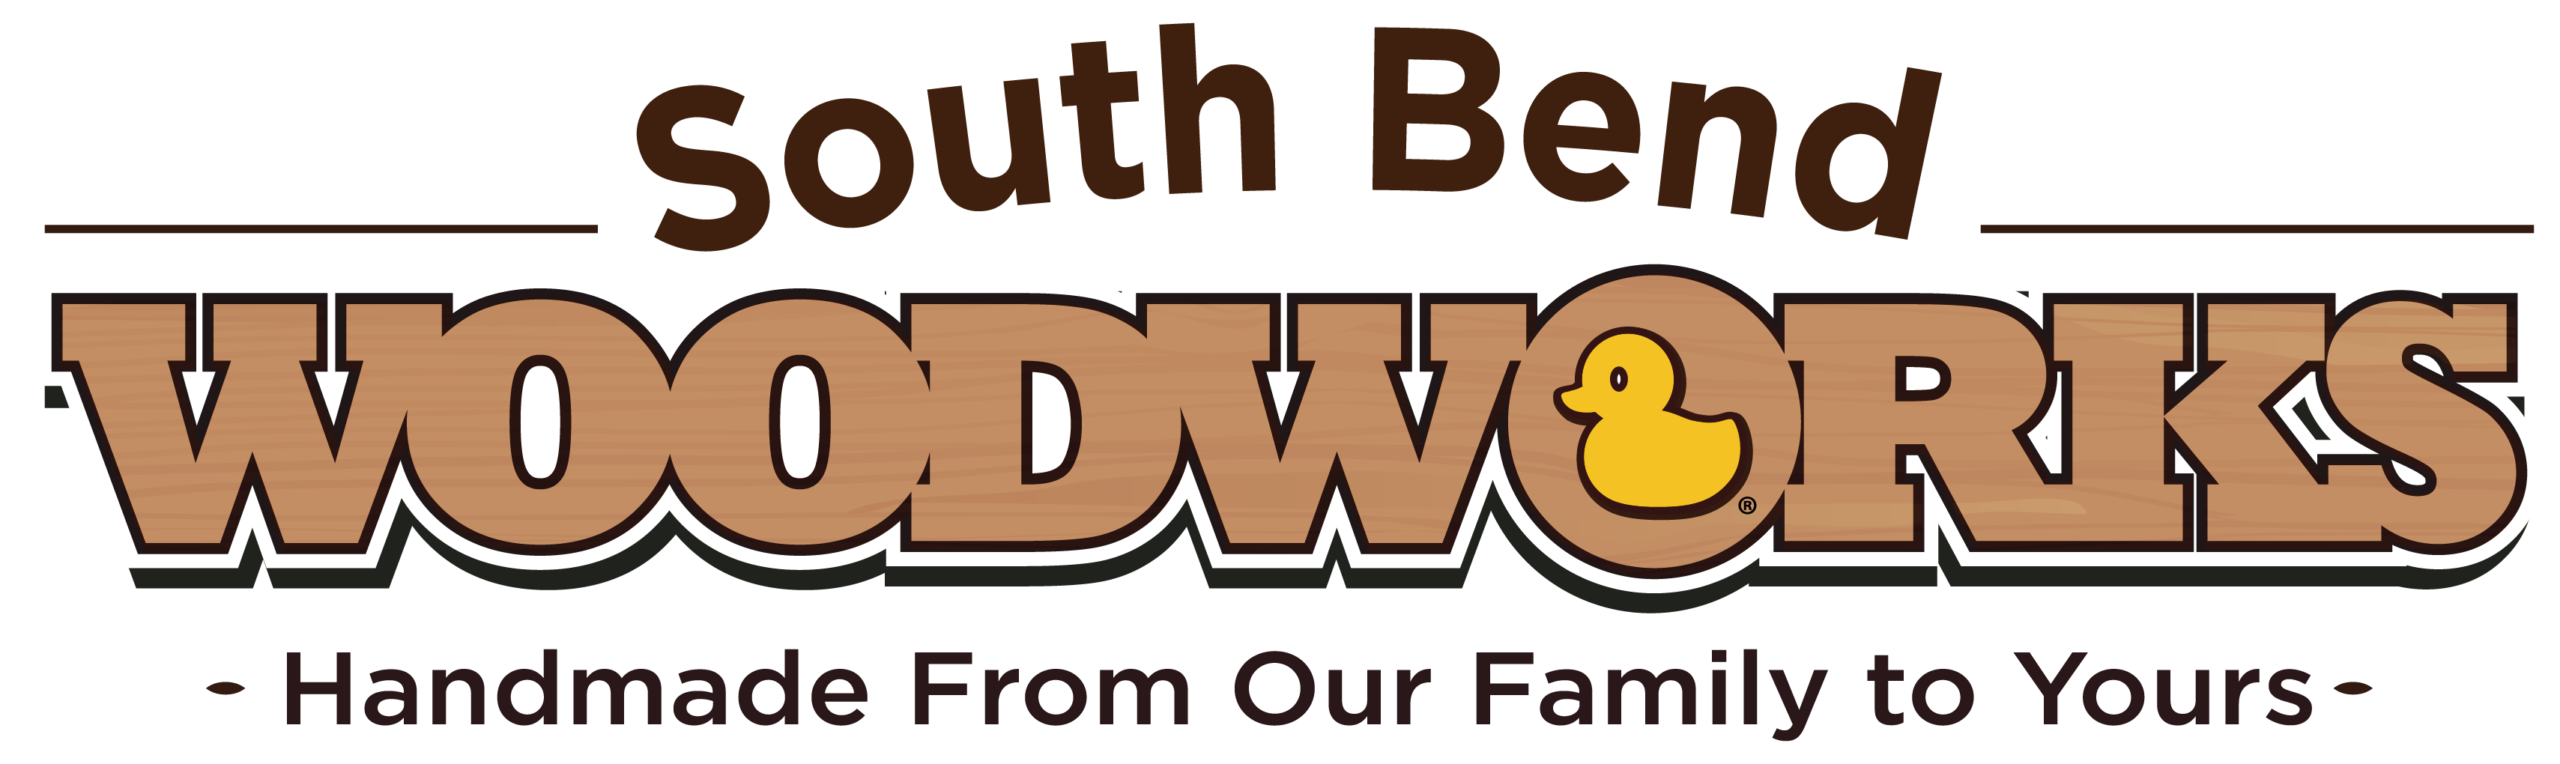 South Bend Woodworks